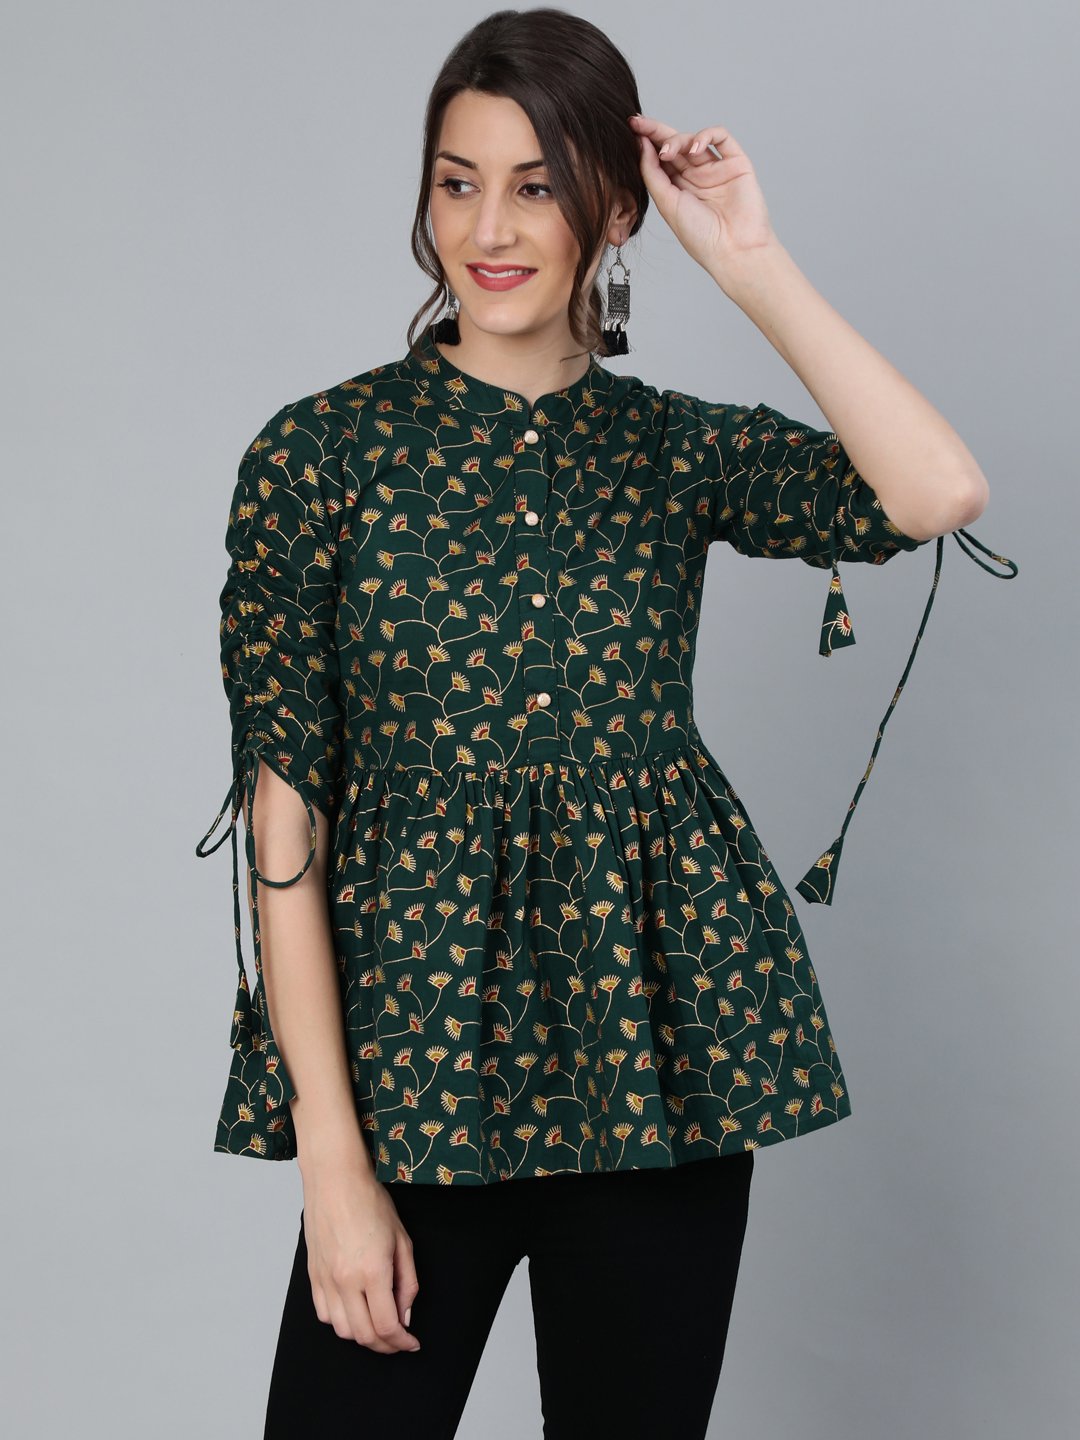 Women's Green Floral Printed Top With Mandarin Collar & Three Quarter Sleeves - Nayo Clothing